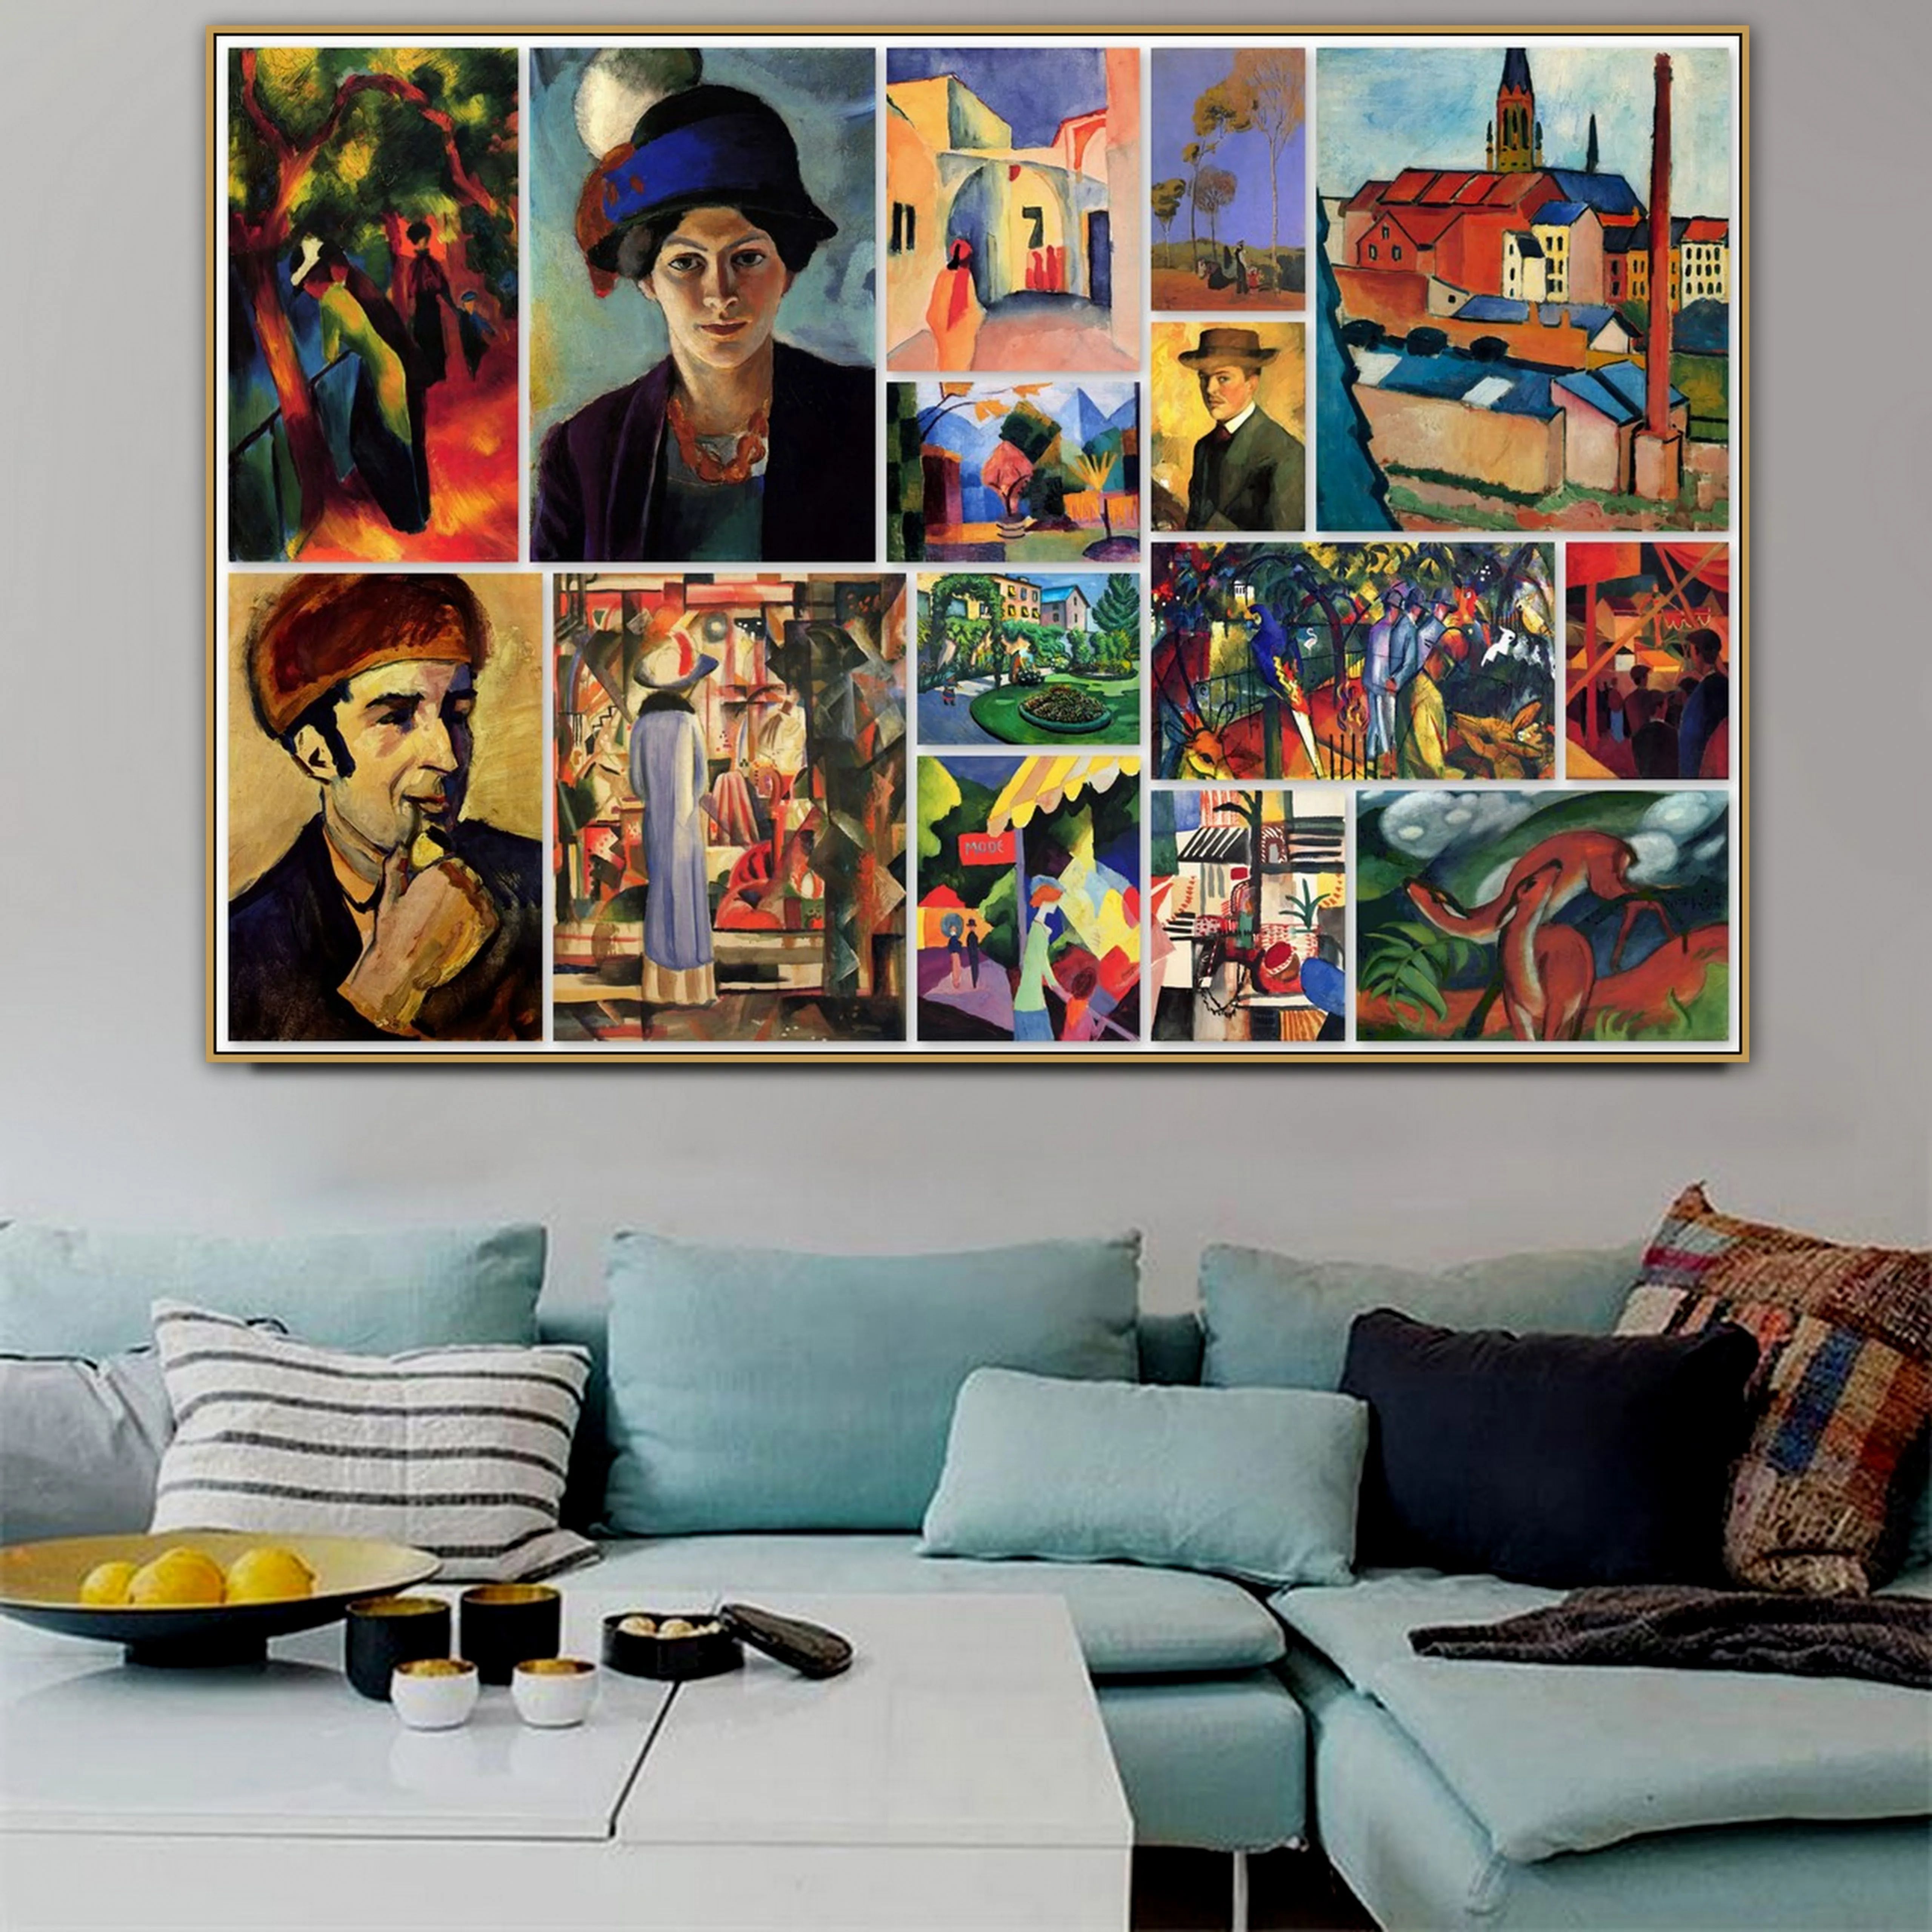 

August Macke Old Famous Master Artist Large Bright Shop Painting Picture Collage Print for Room Hanging Decoration Wall Artwork